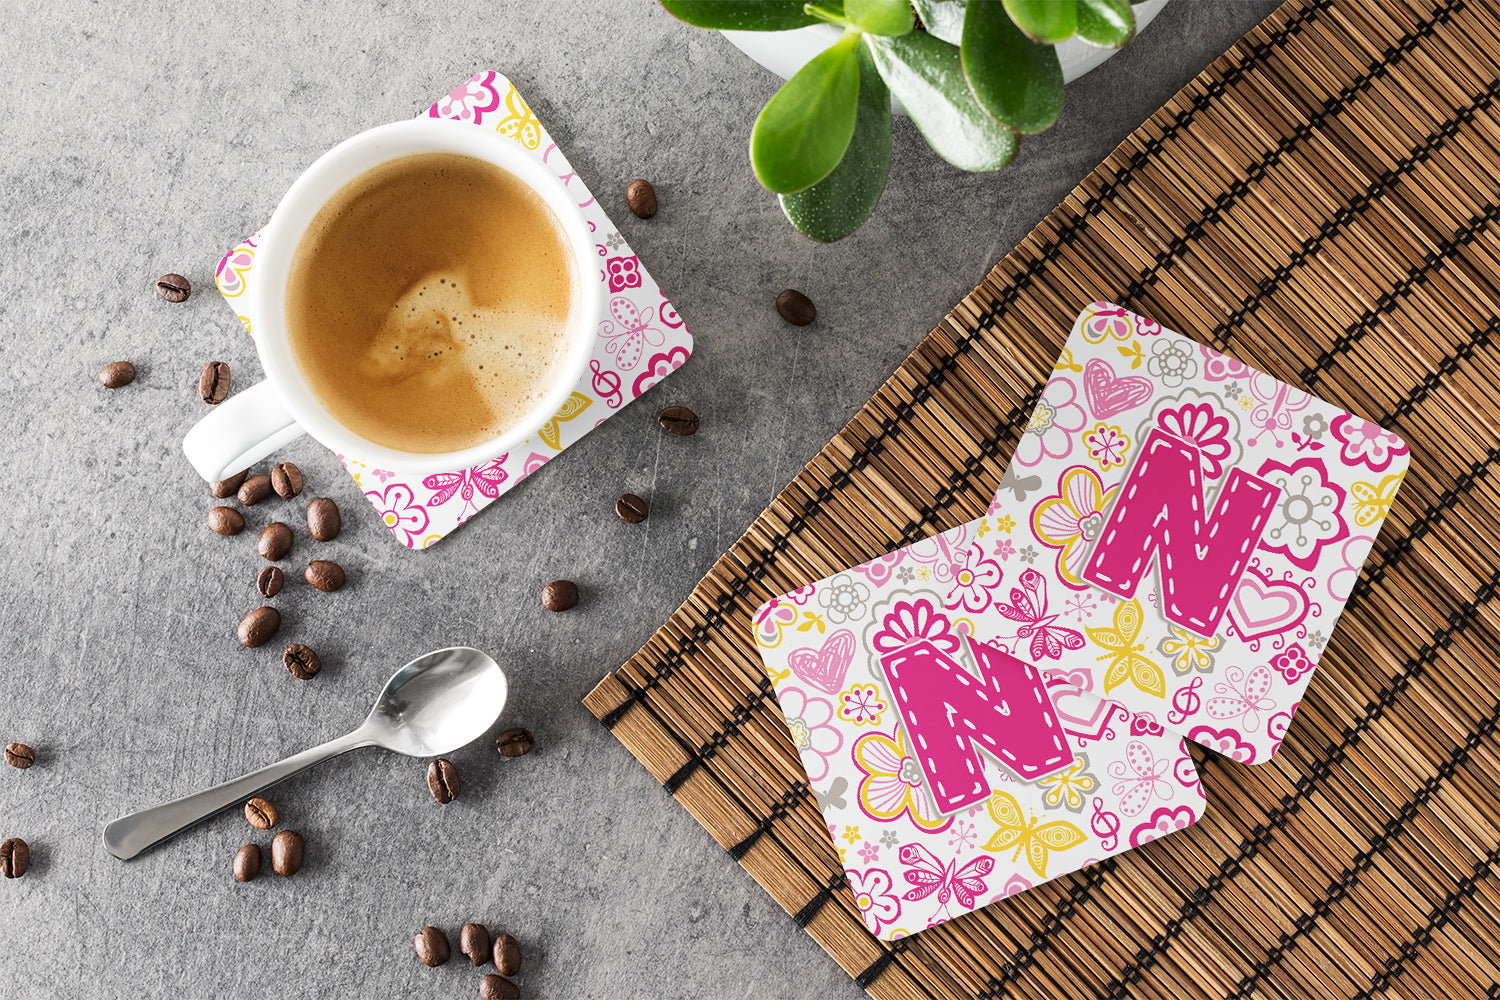 Set of 4 Letter N Flowers and Butterflies Pink Foam Coasters CJ2005-NFC - the-store.com